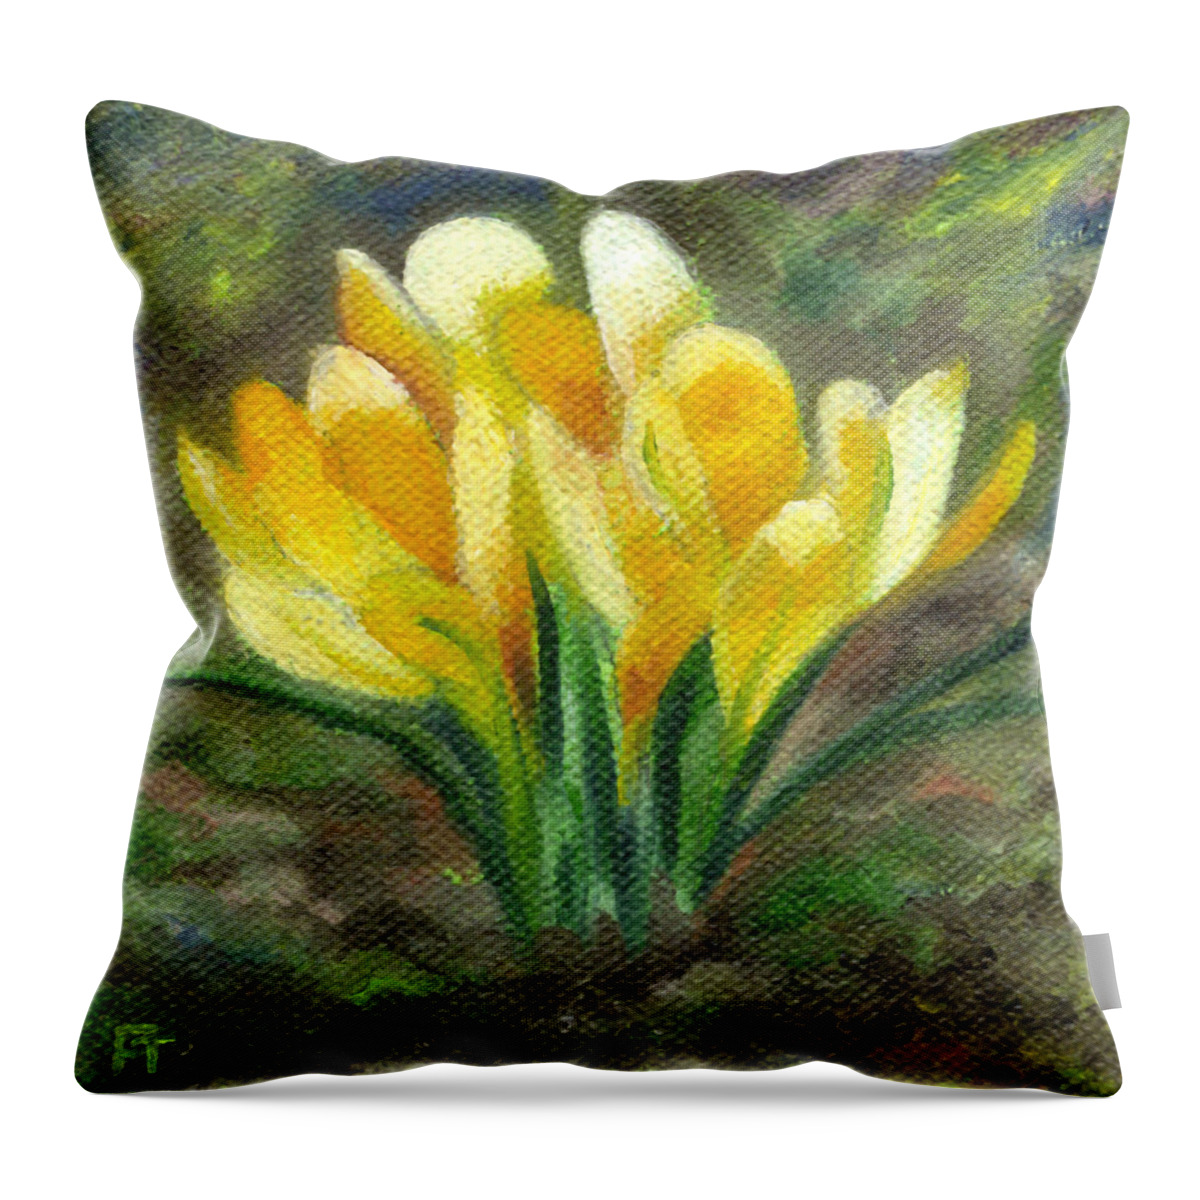 Crocus Throw Pillow featuring the painting Yellow Crocus by FT McKinstry